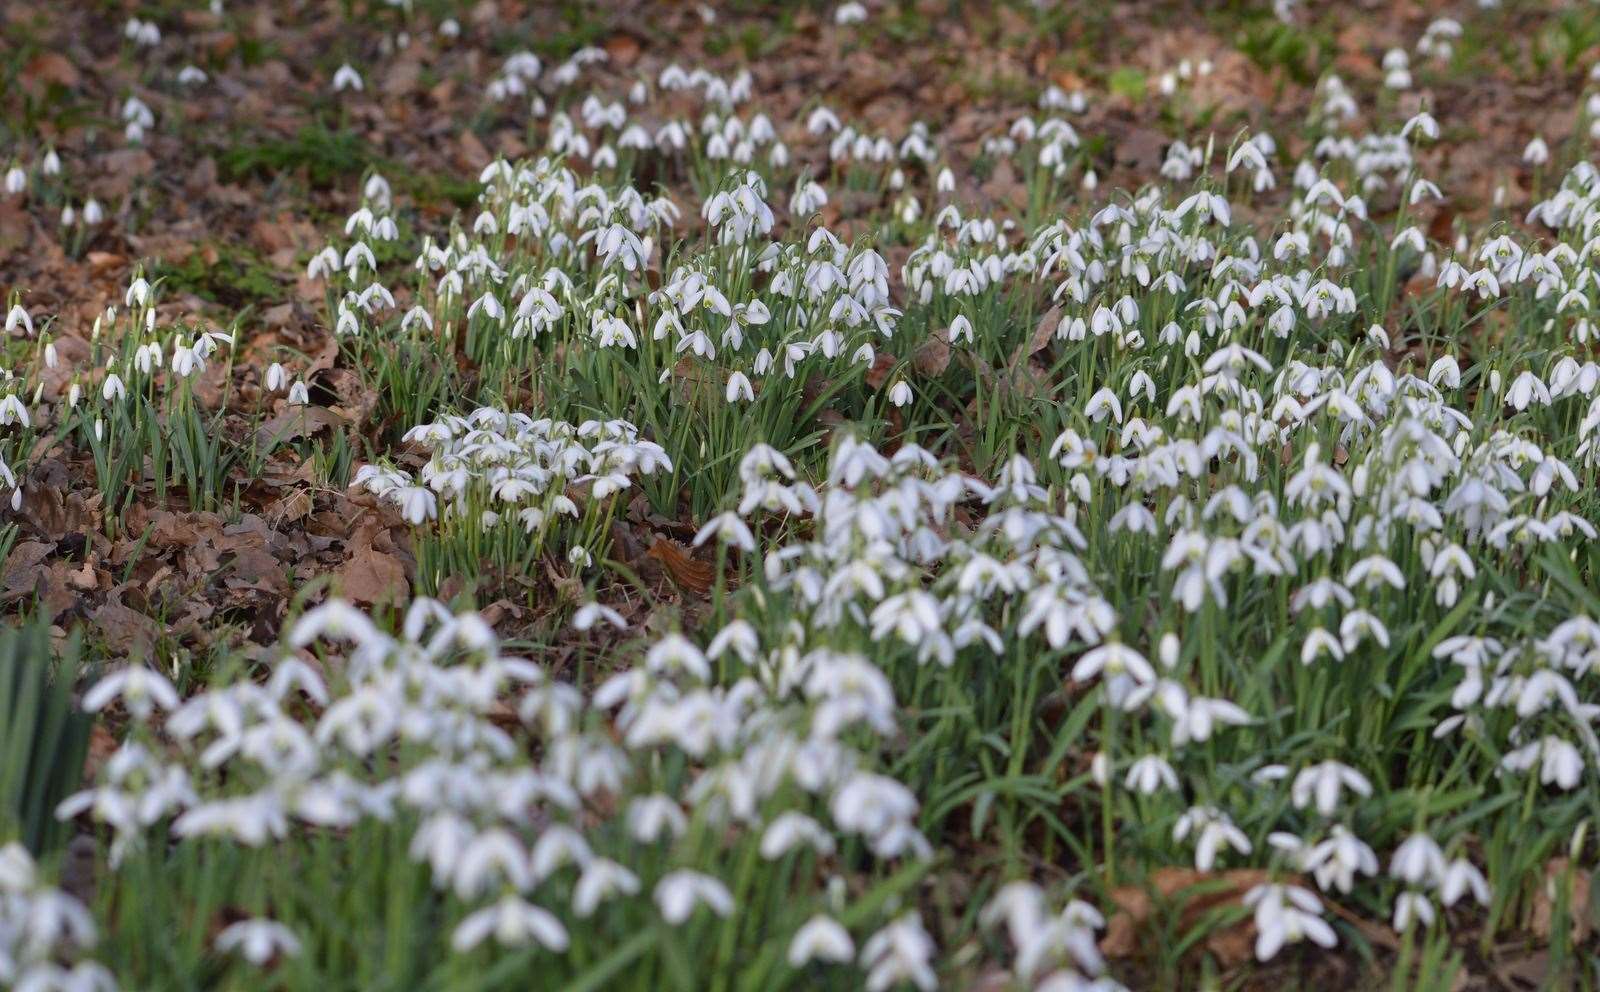 The garden at Knowle Hill Farm has been grown over 40 years around the snowdrops. Picture: National Garden Scheme